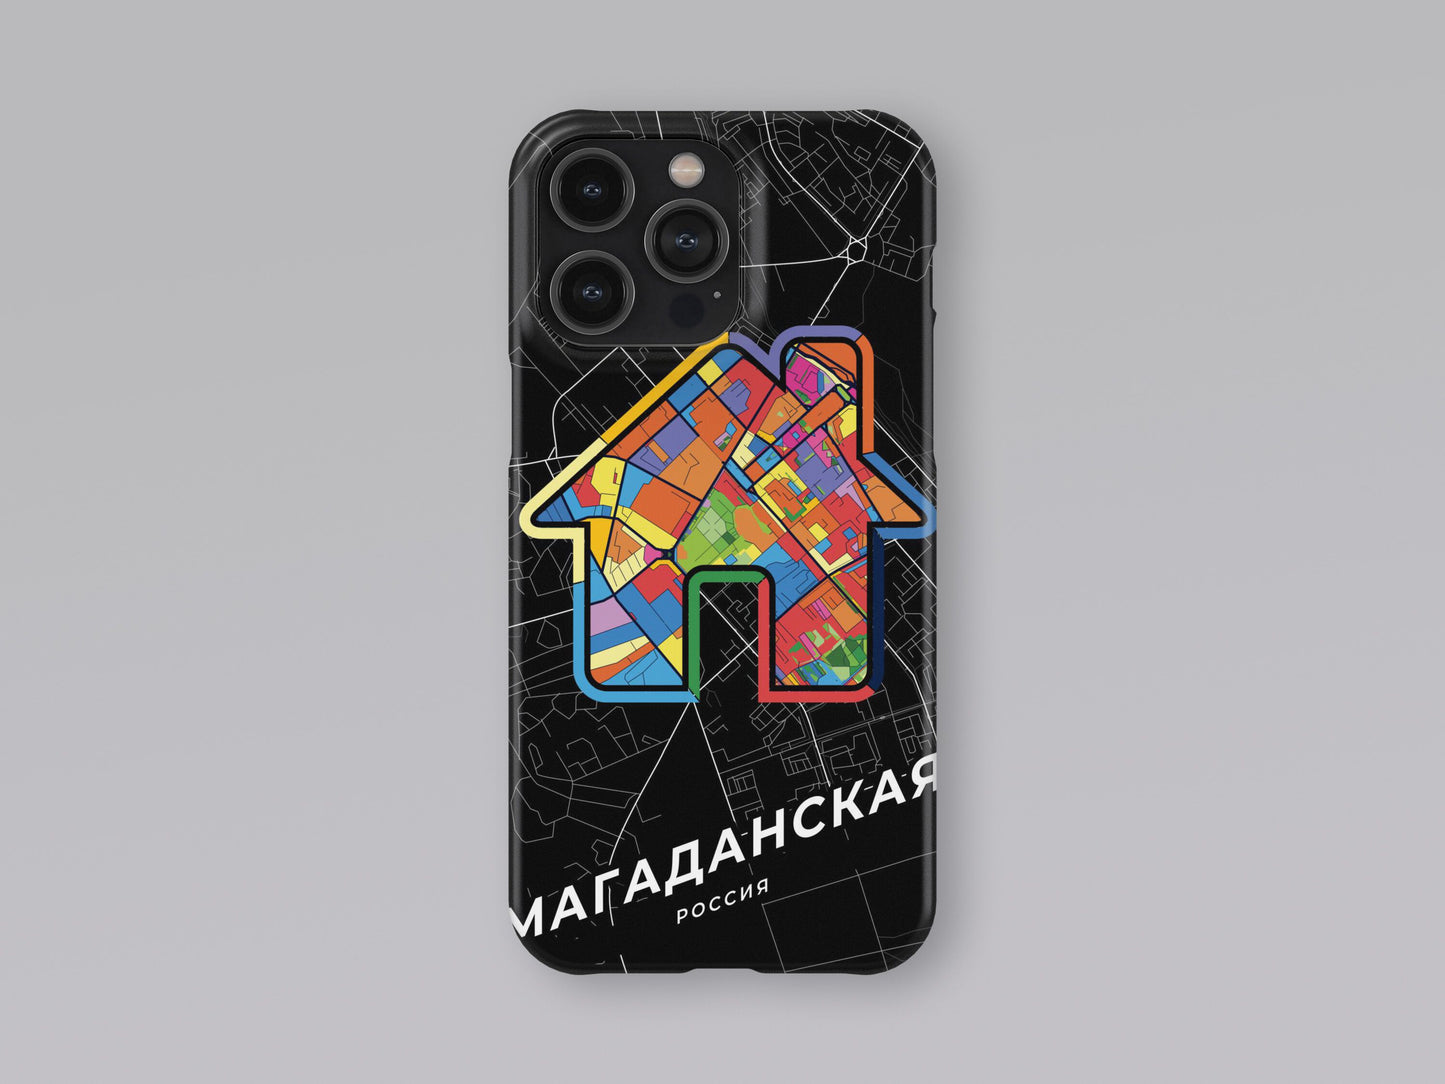 Magadan Russia slim phone case with colorful icon. Birthday, wedding or housewarming gift. Couple match cases. 3